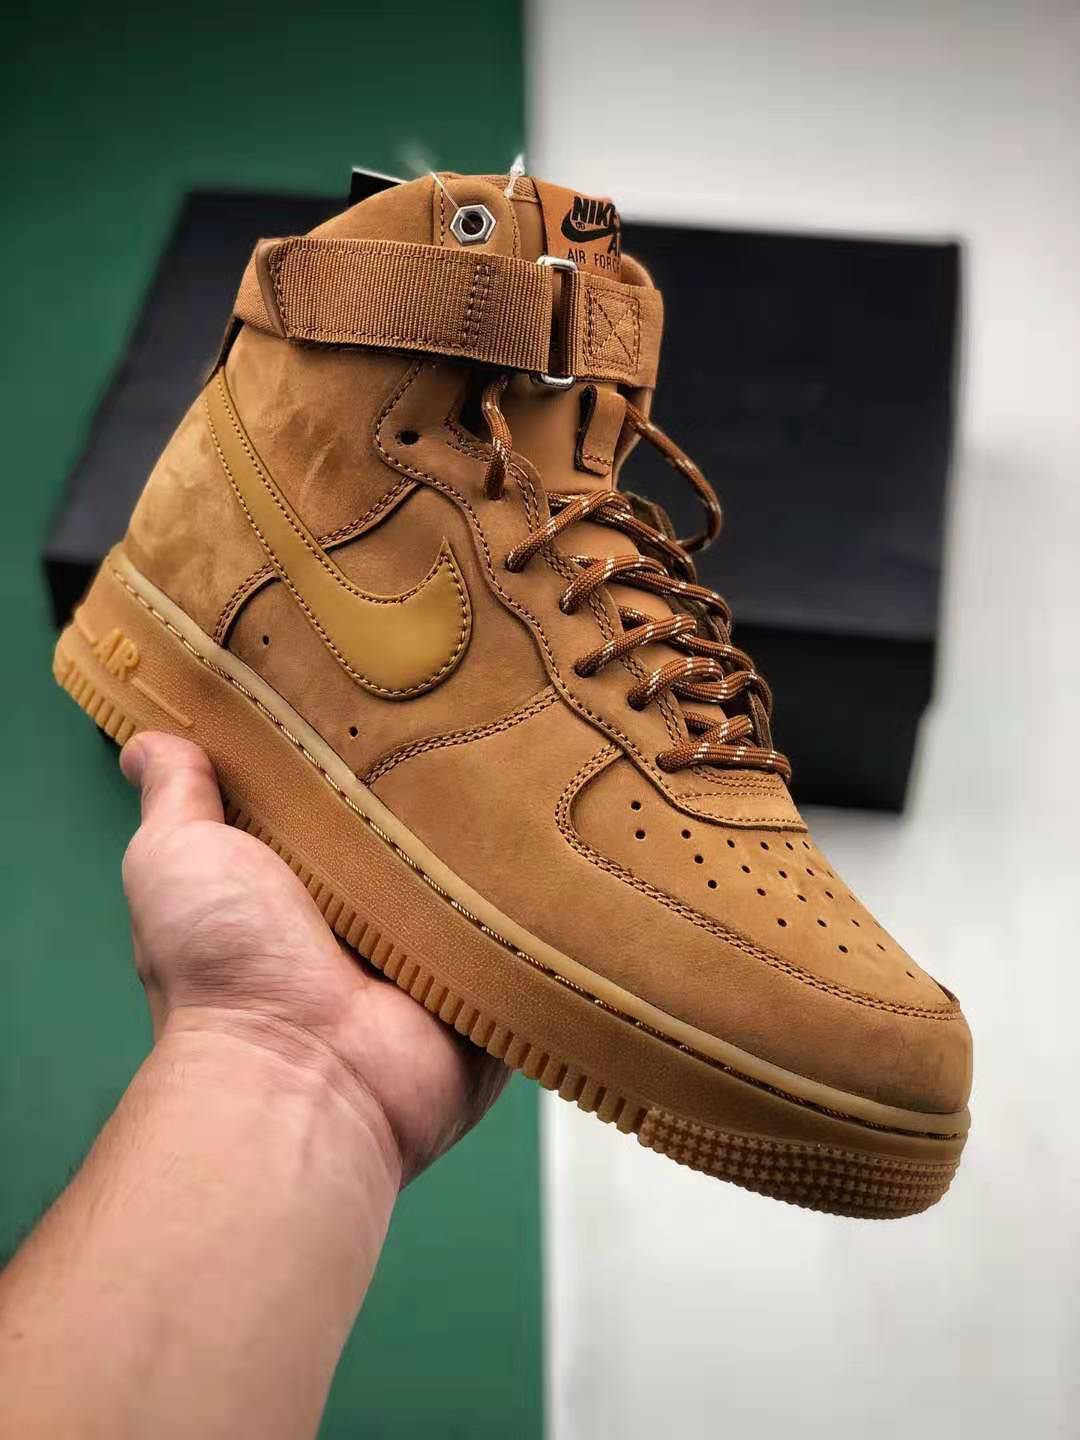 Nike Air Force 1 High Flax CJ9178-200 - Iconic Style and Unbeatable Performance!